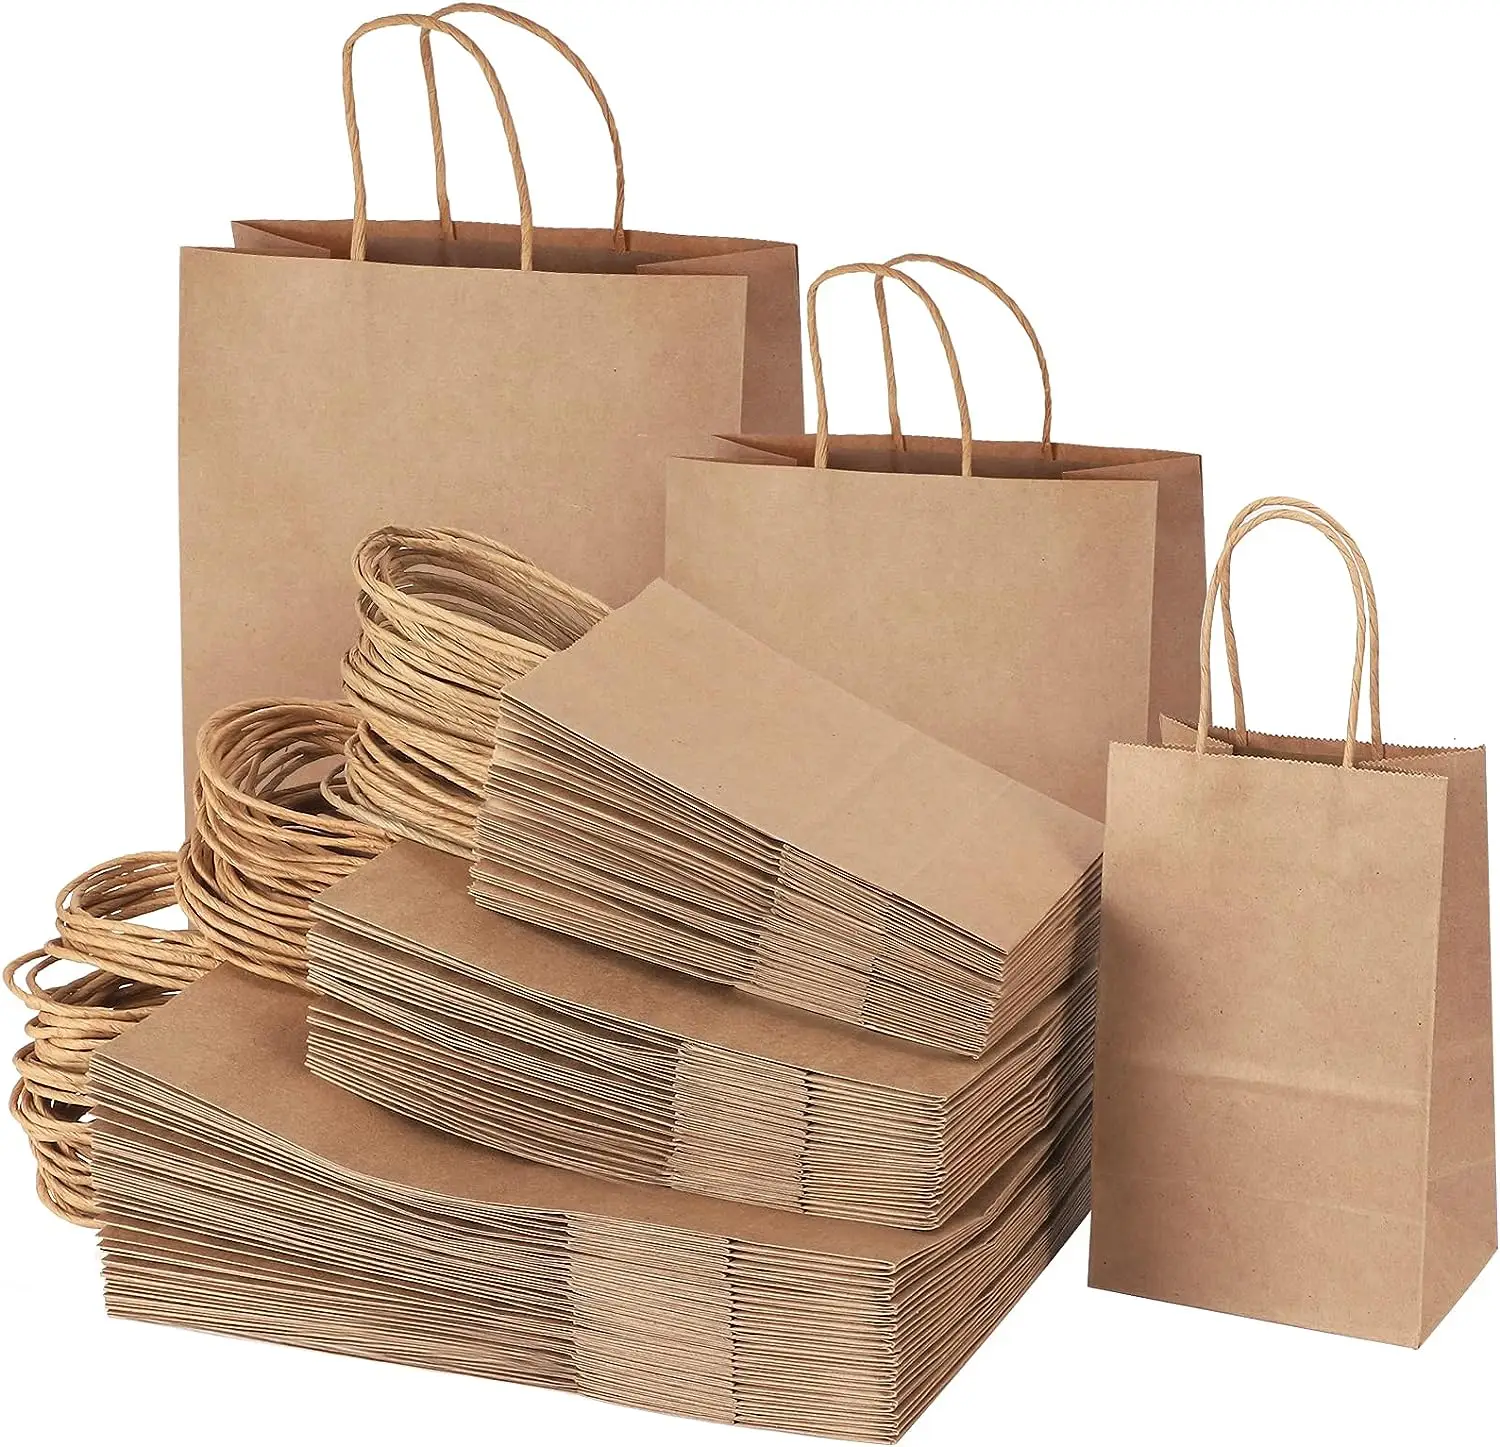 

25/50Pcs Brown Kraft Paper Gift Bags With Handle Wedding Birthday Party Favor Bags For Small Shopping Retail Merchandise Bags